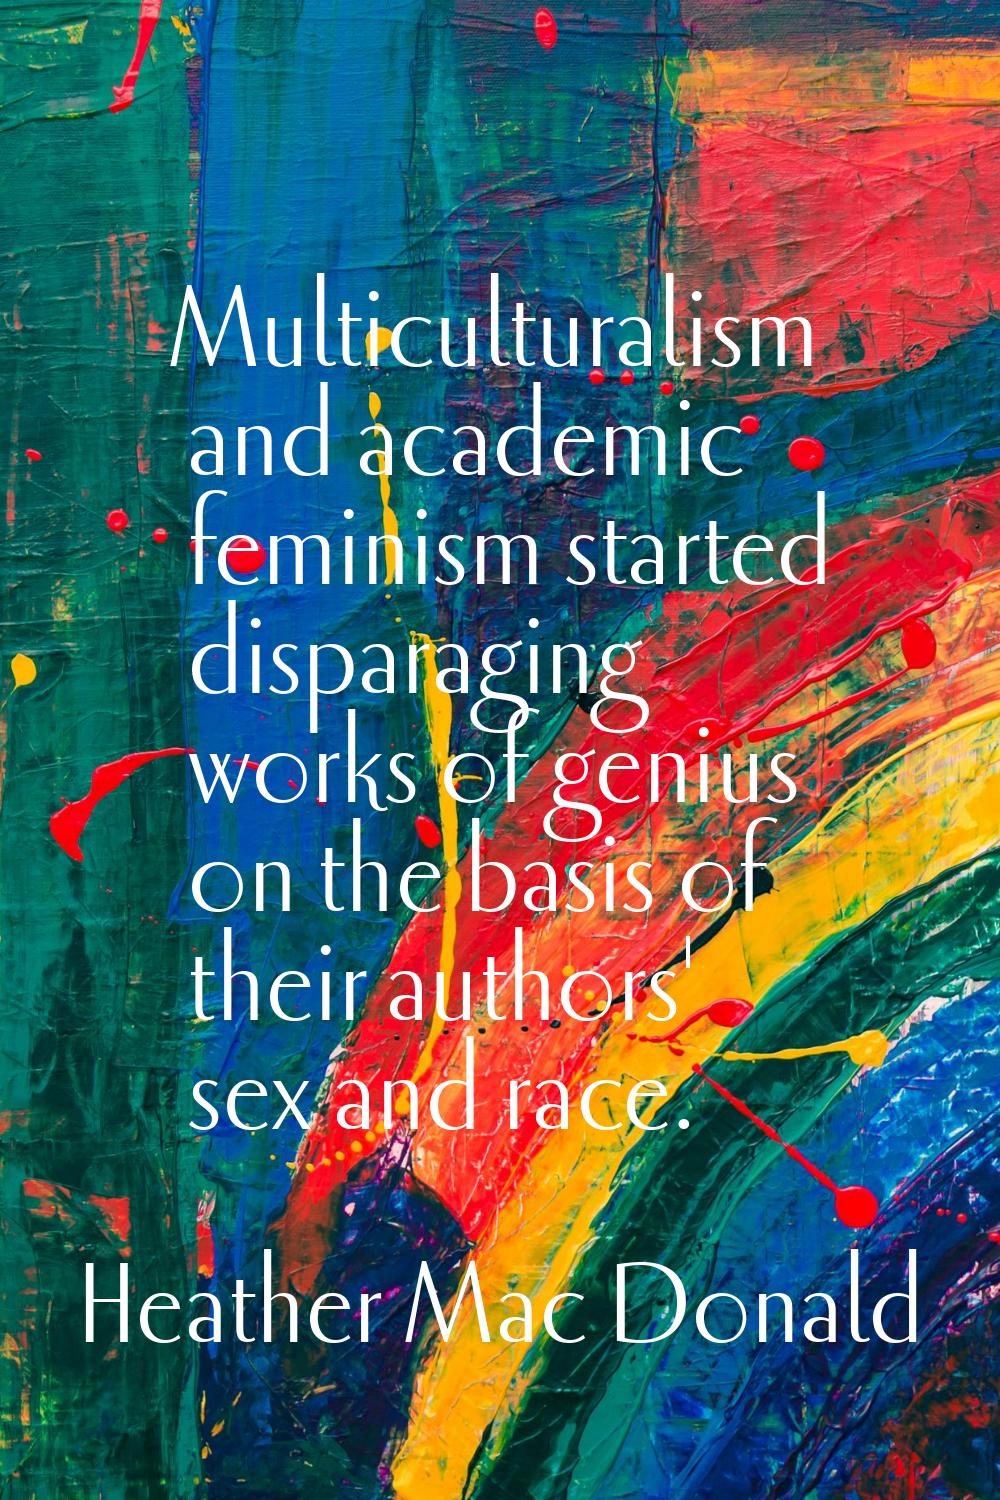 Multiculturalism and academic feminism started disparaging works of genius on the basis of their au